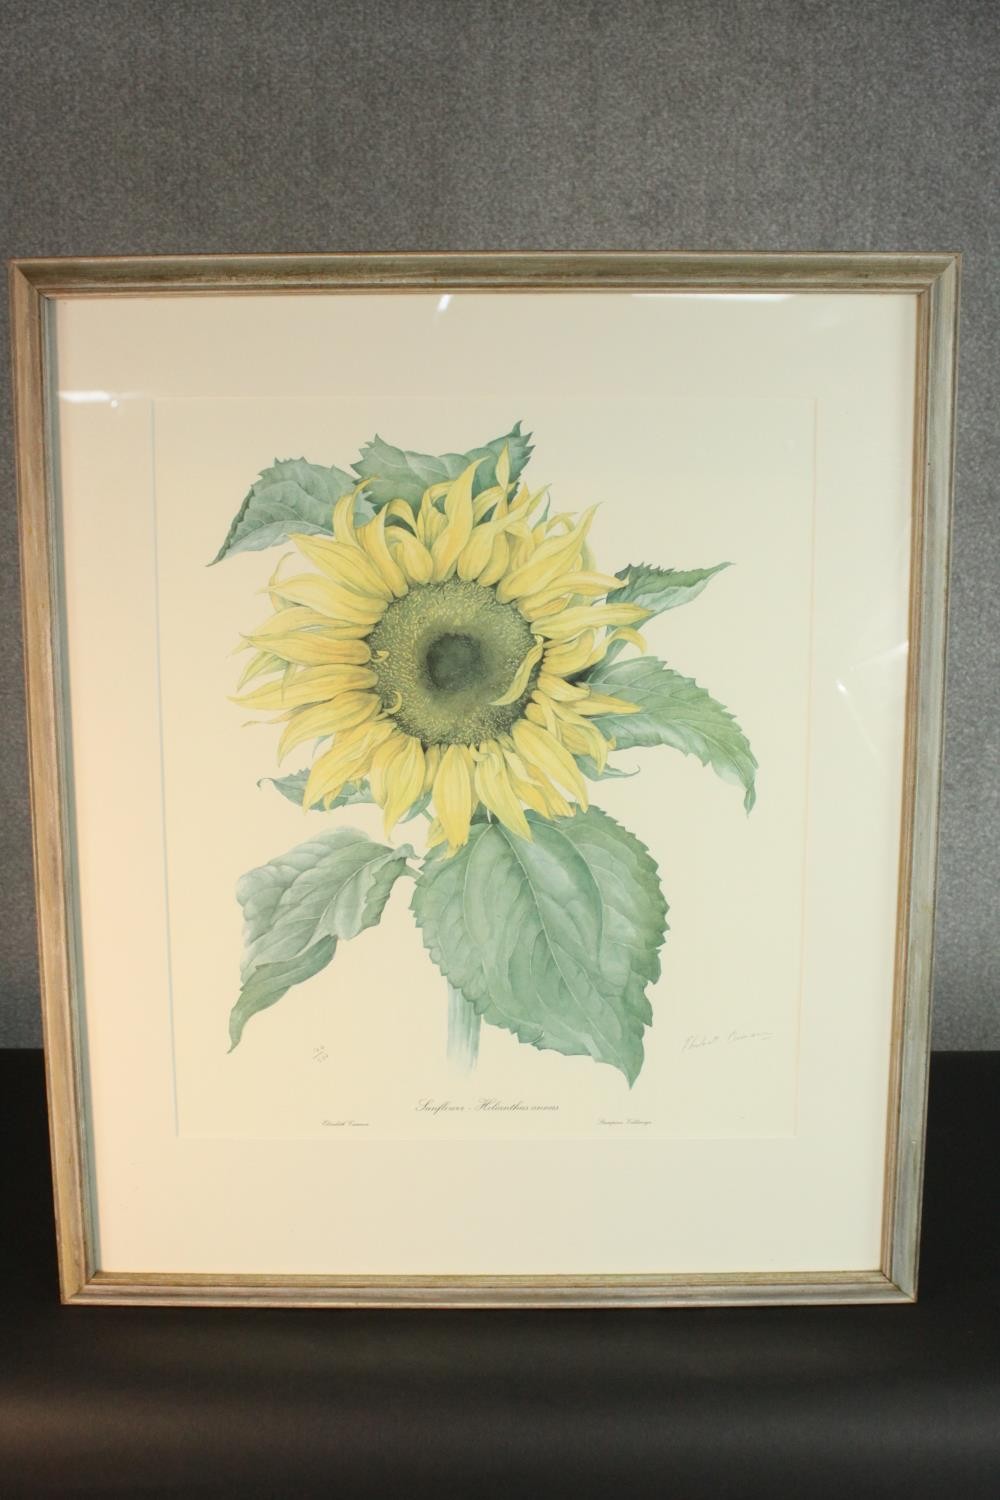 Elizabeth Cameron (1915-2009), Sunflower, limited edition print 120/500, signed and numbered in - Image 2 of 6